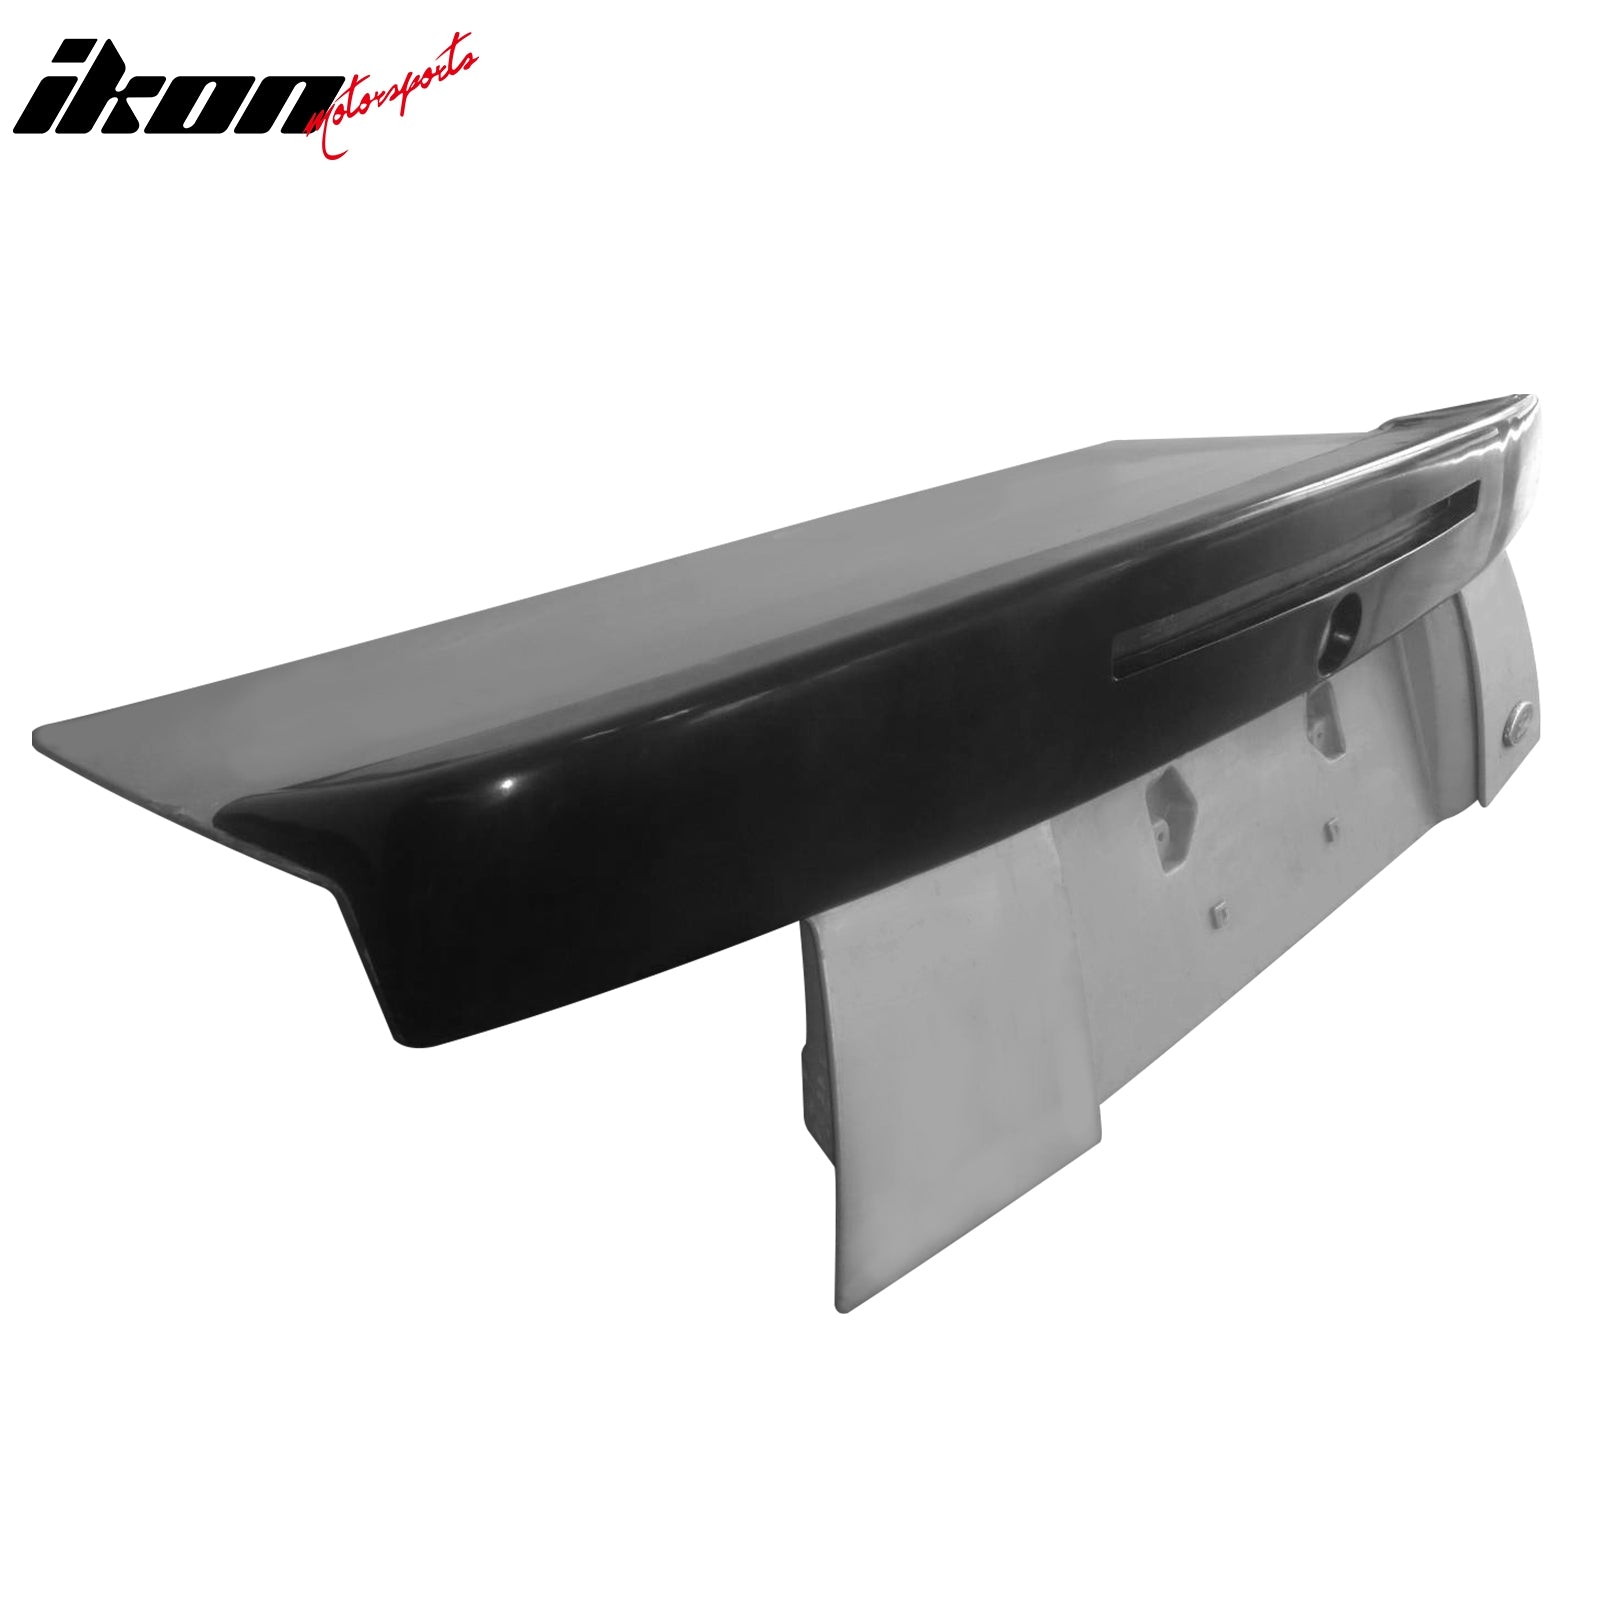 Fits 99-04 Ford Mustang Cobra SVT Style Rear Trunk Spoiler Wing PU - Unpainted